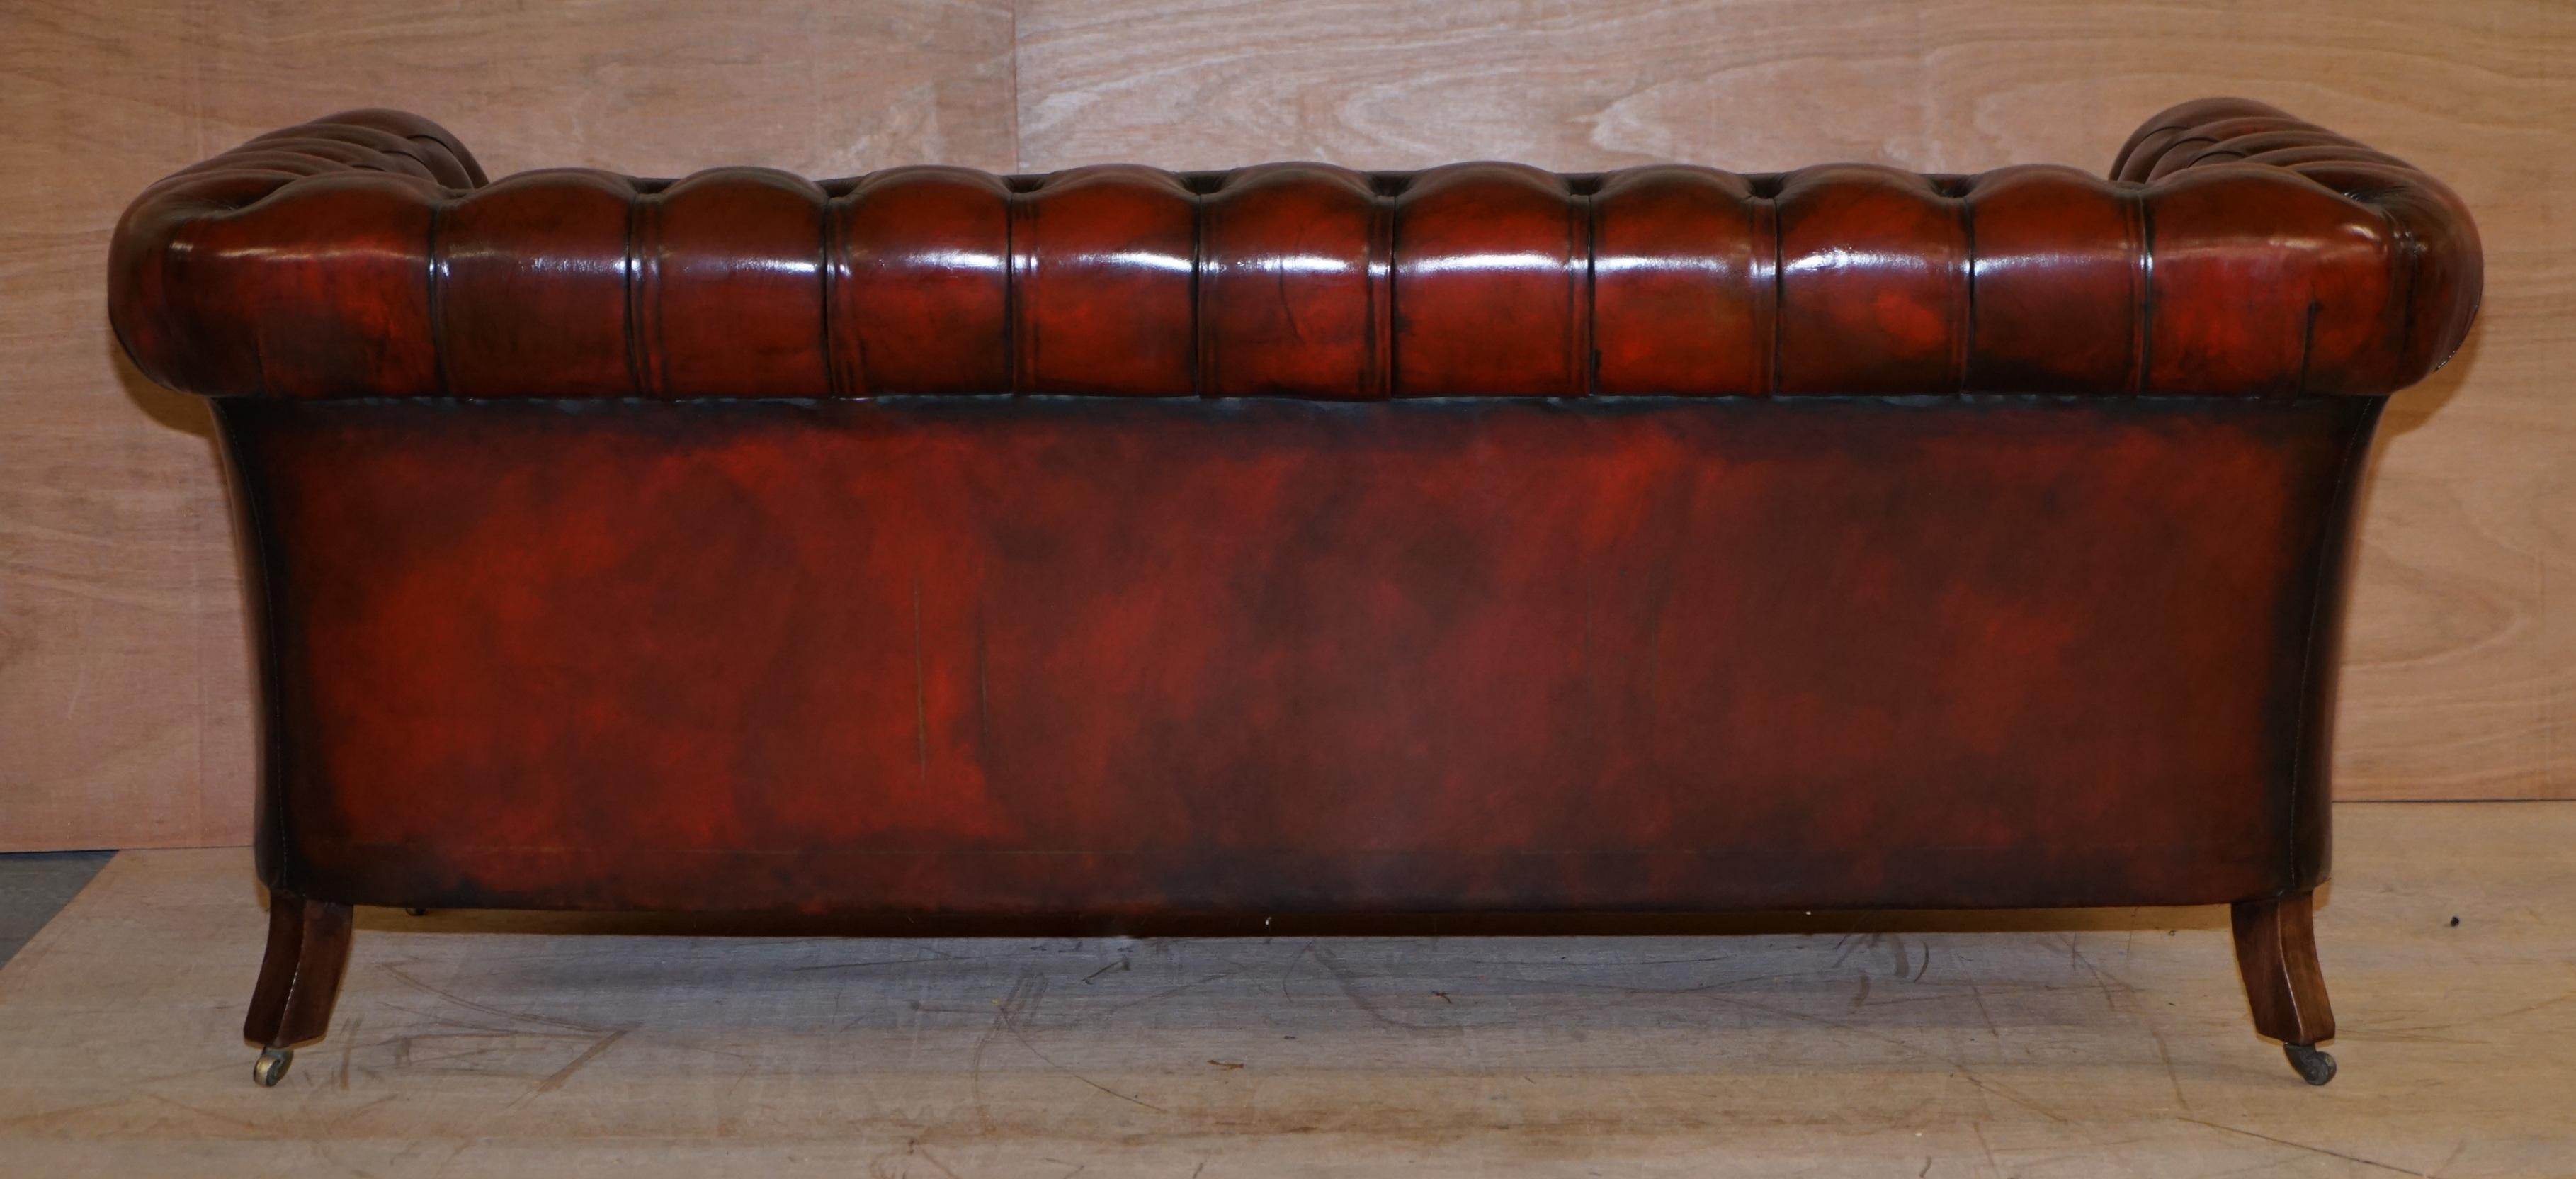 Restored Vintage Oxblood Bordeaux Leather Chesterfield Club Sofa on Turned Legs For Sale 8